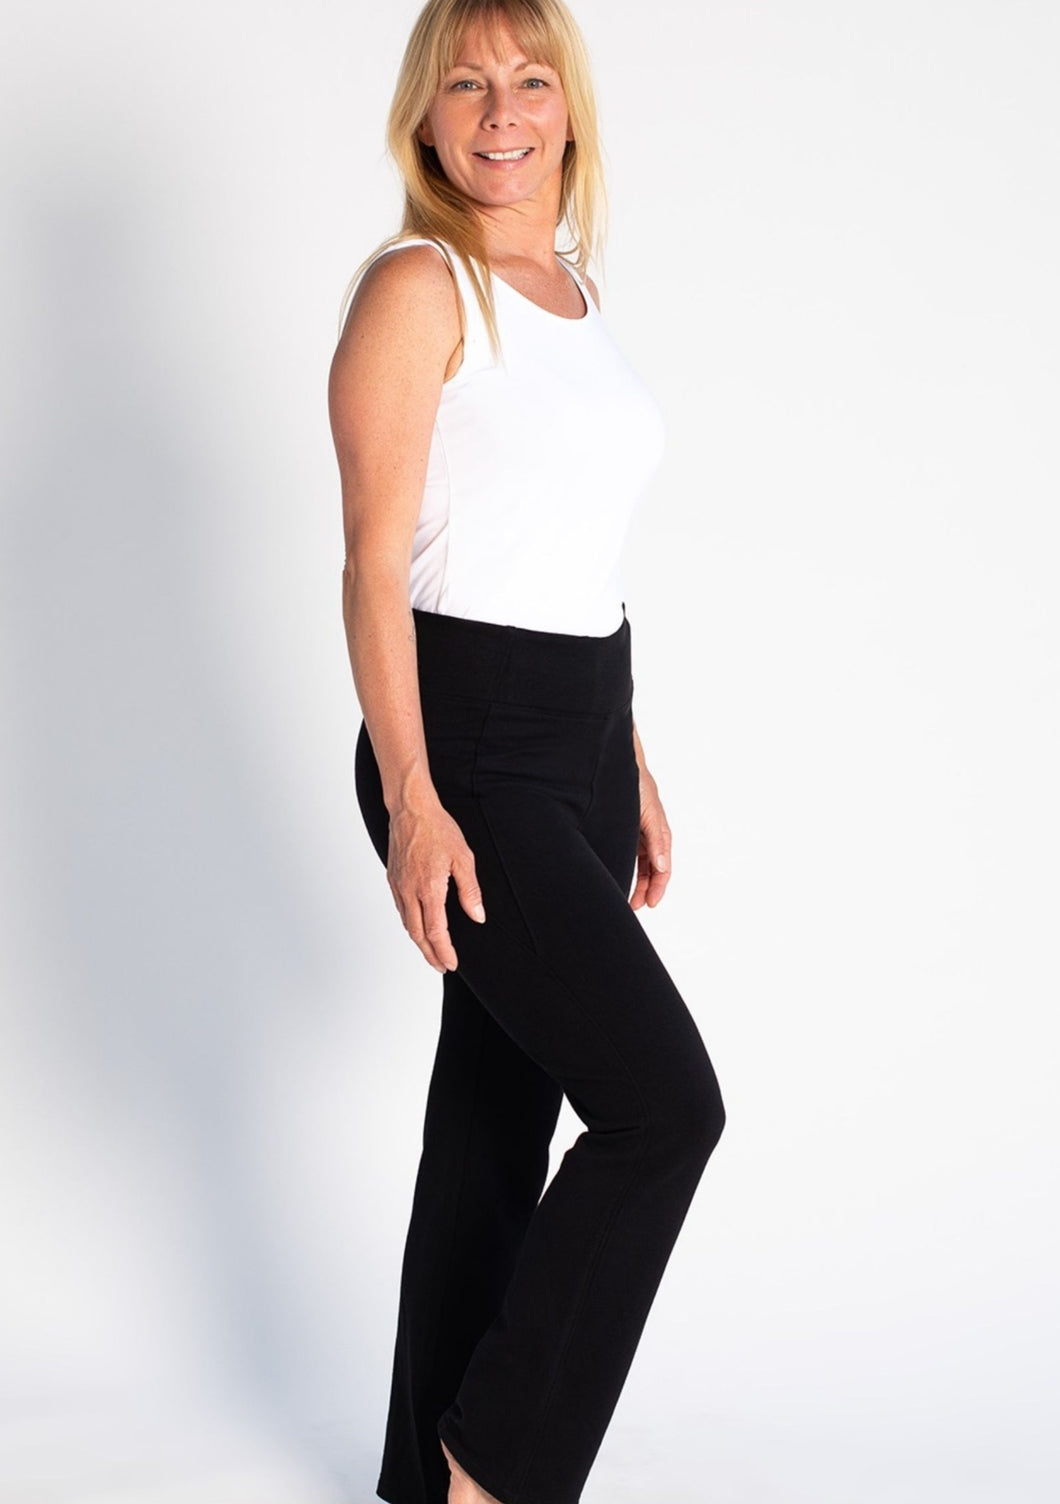 The Clara pant is a pull-on pant that looks sophisticated but feels like lounge wear! Made a with soft bamboo fabrication, so that it can take you from work trips to weekend road trips. The wide waistband provides extra coverage and flatters the figure. Fabrication: 67% Viscose from Bamboo 29% Cotton 4% Spandex TERRERA colour Black $90.00